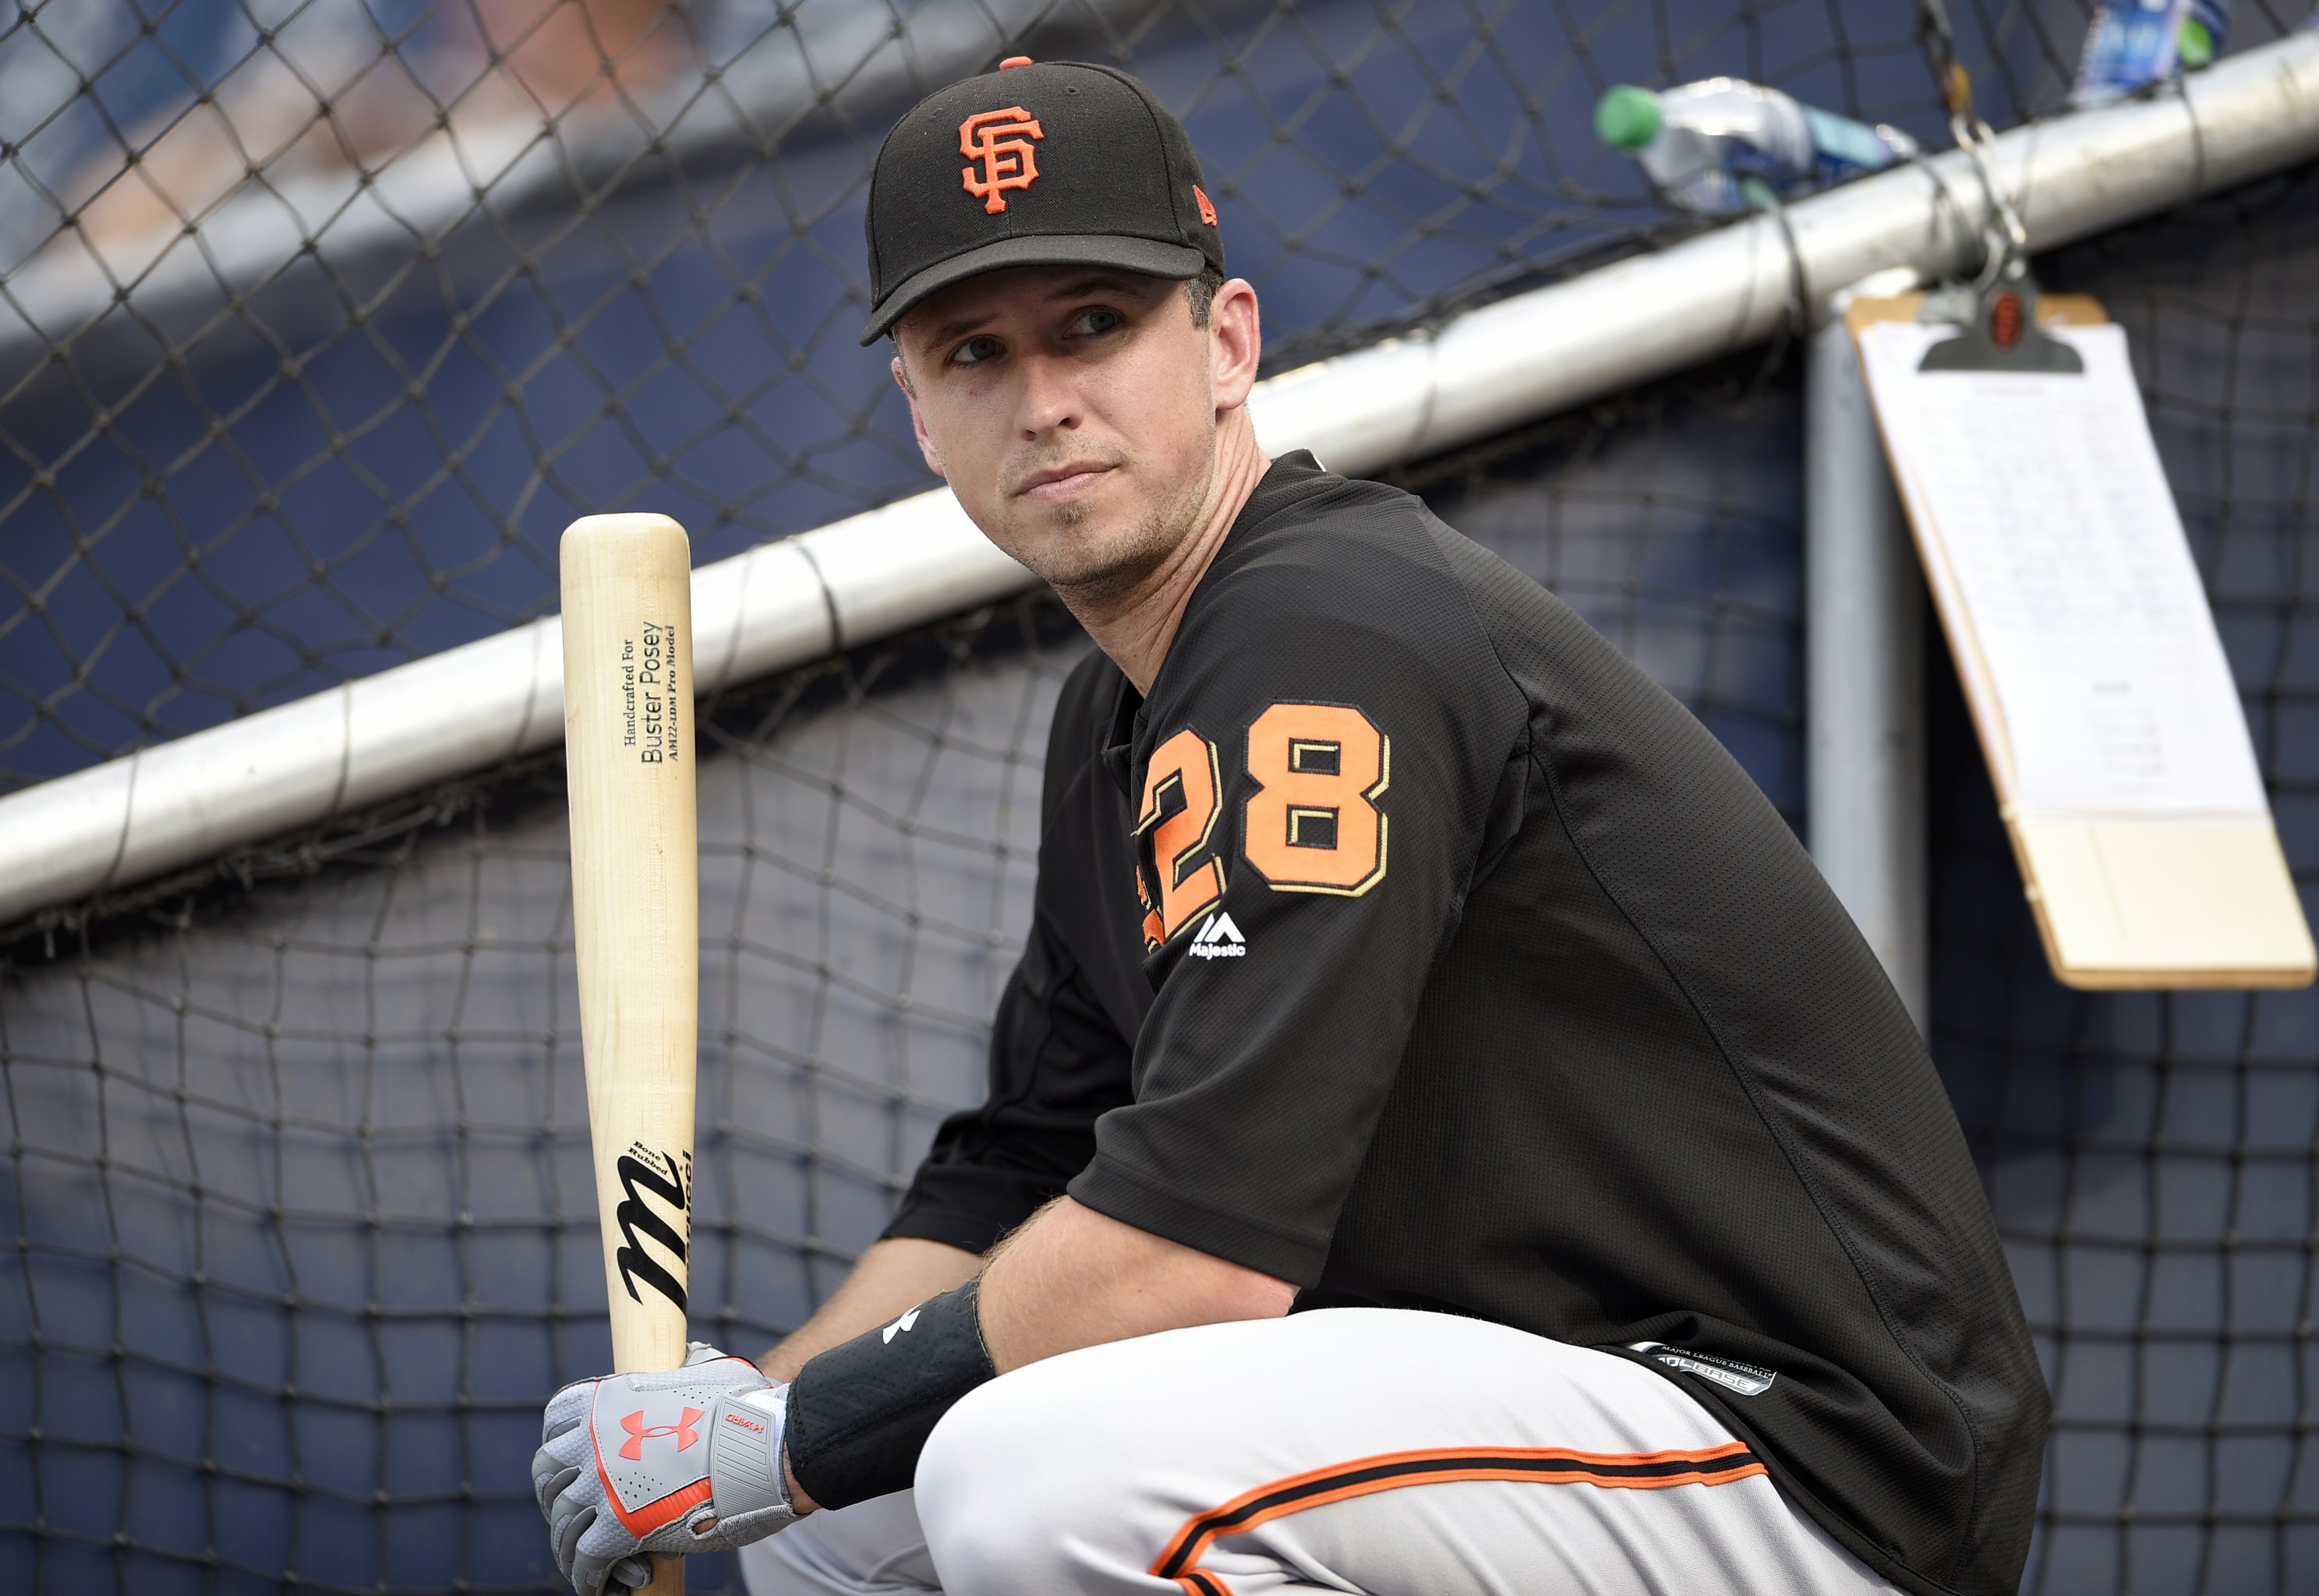 When did Buster Posey become the Giants' wise old veteran?